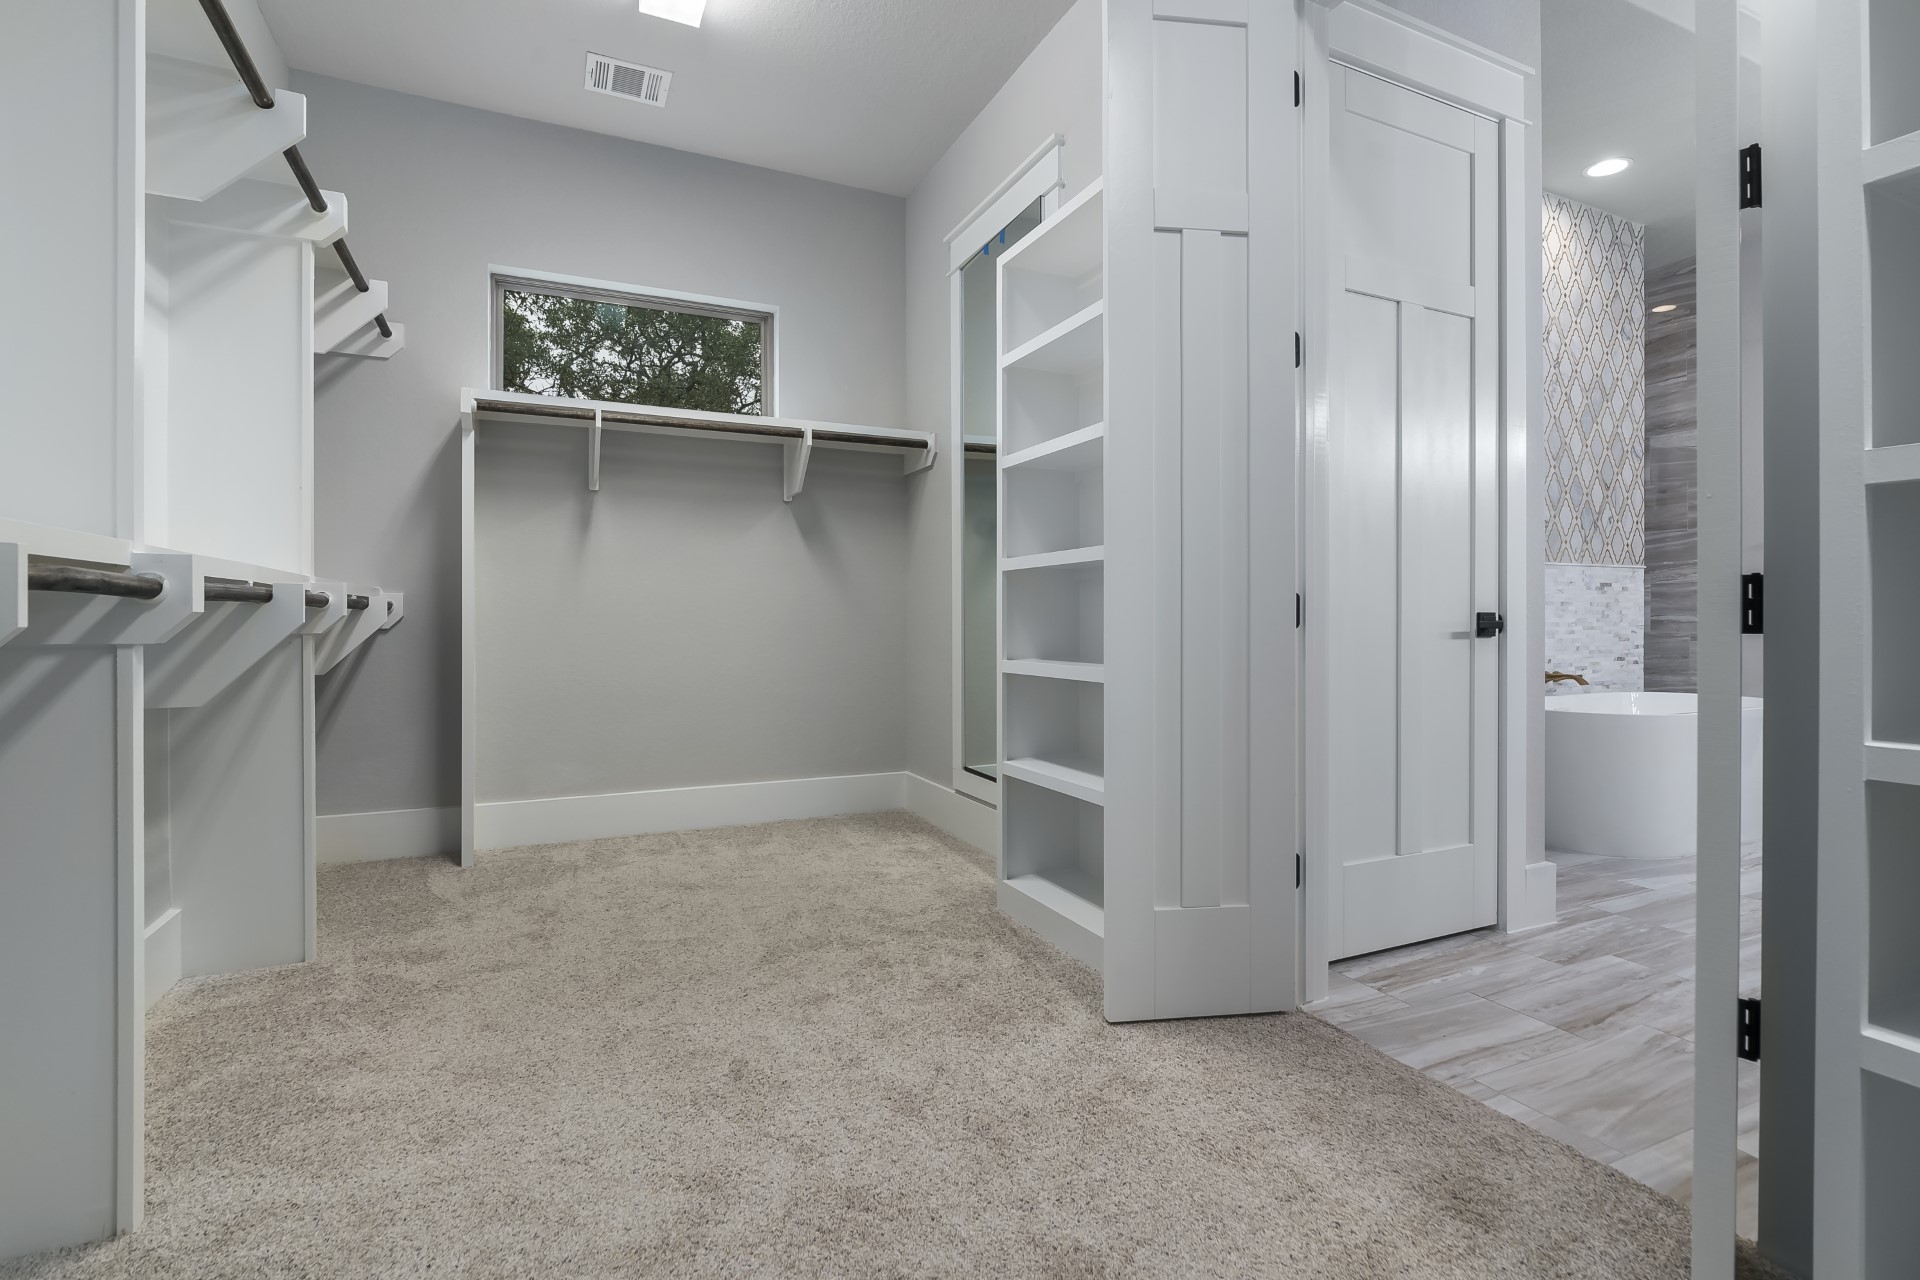 A front view of the closet area within the Belle Oaks custom floor plan from JLP Builders